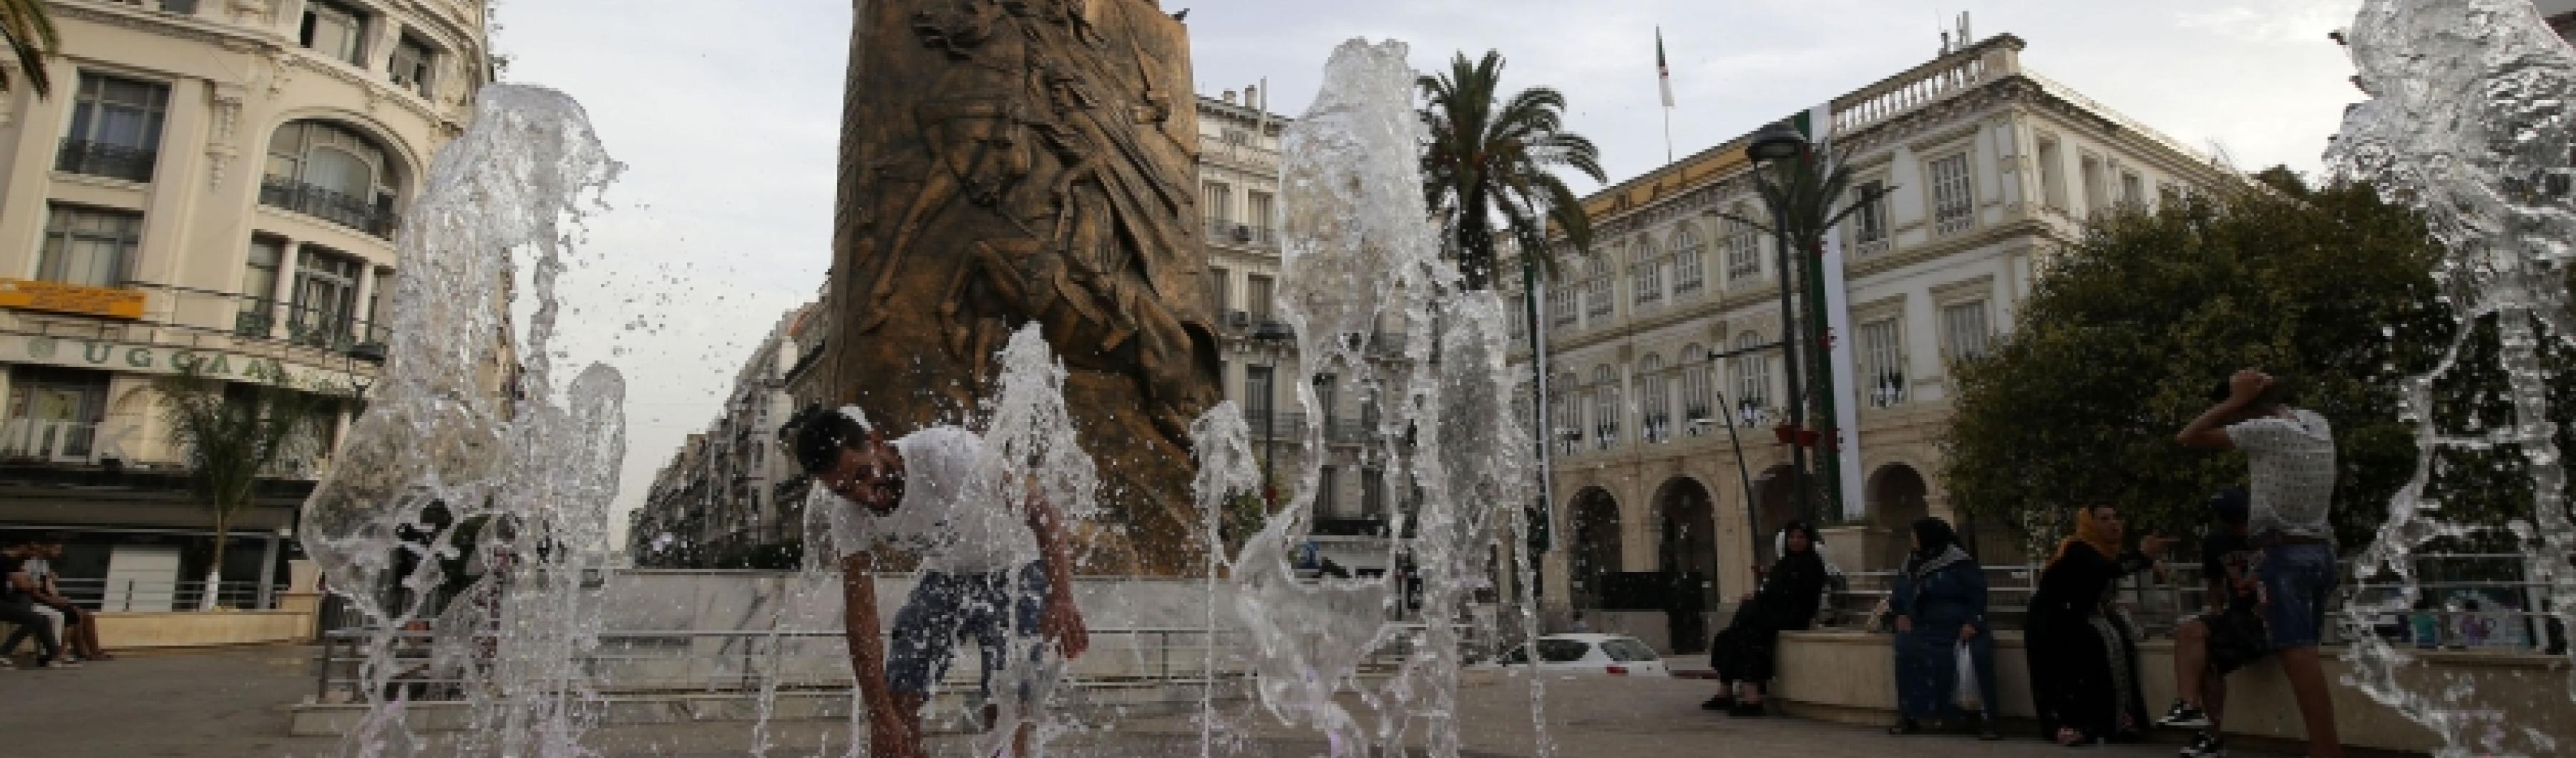 A man cools off at a splash pad in downtown Algiers, Algeria, where temperatures hit 42°C amid a heatwave that is roasting much of North Africa. 